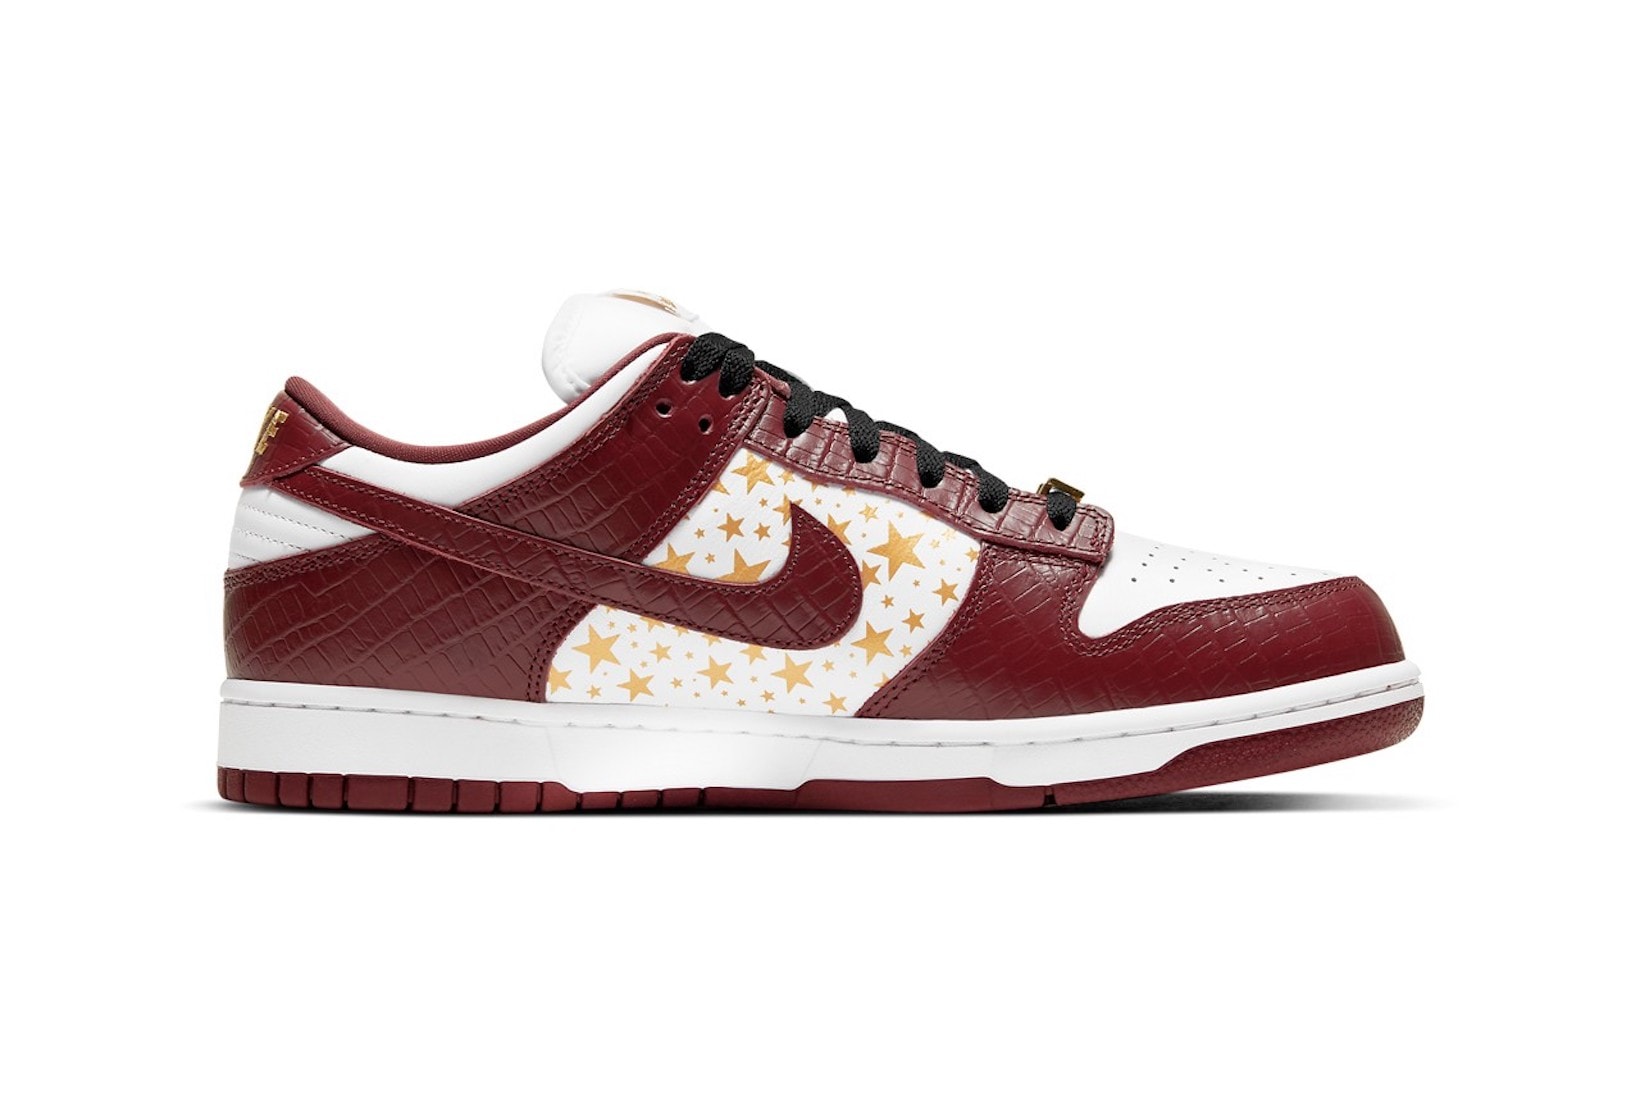 supreme nike sb dunk low collaboration sneakers barkroot brown burgundy red white gold stars lateral black laces